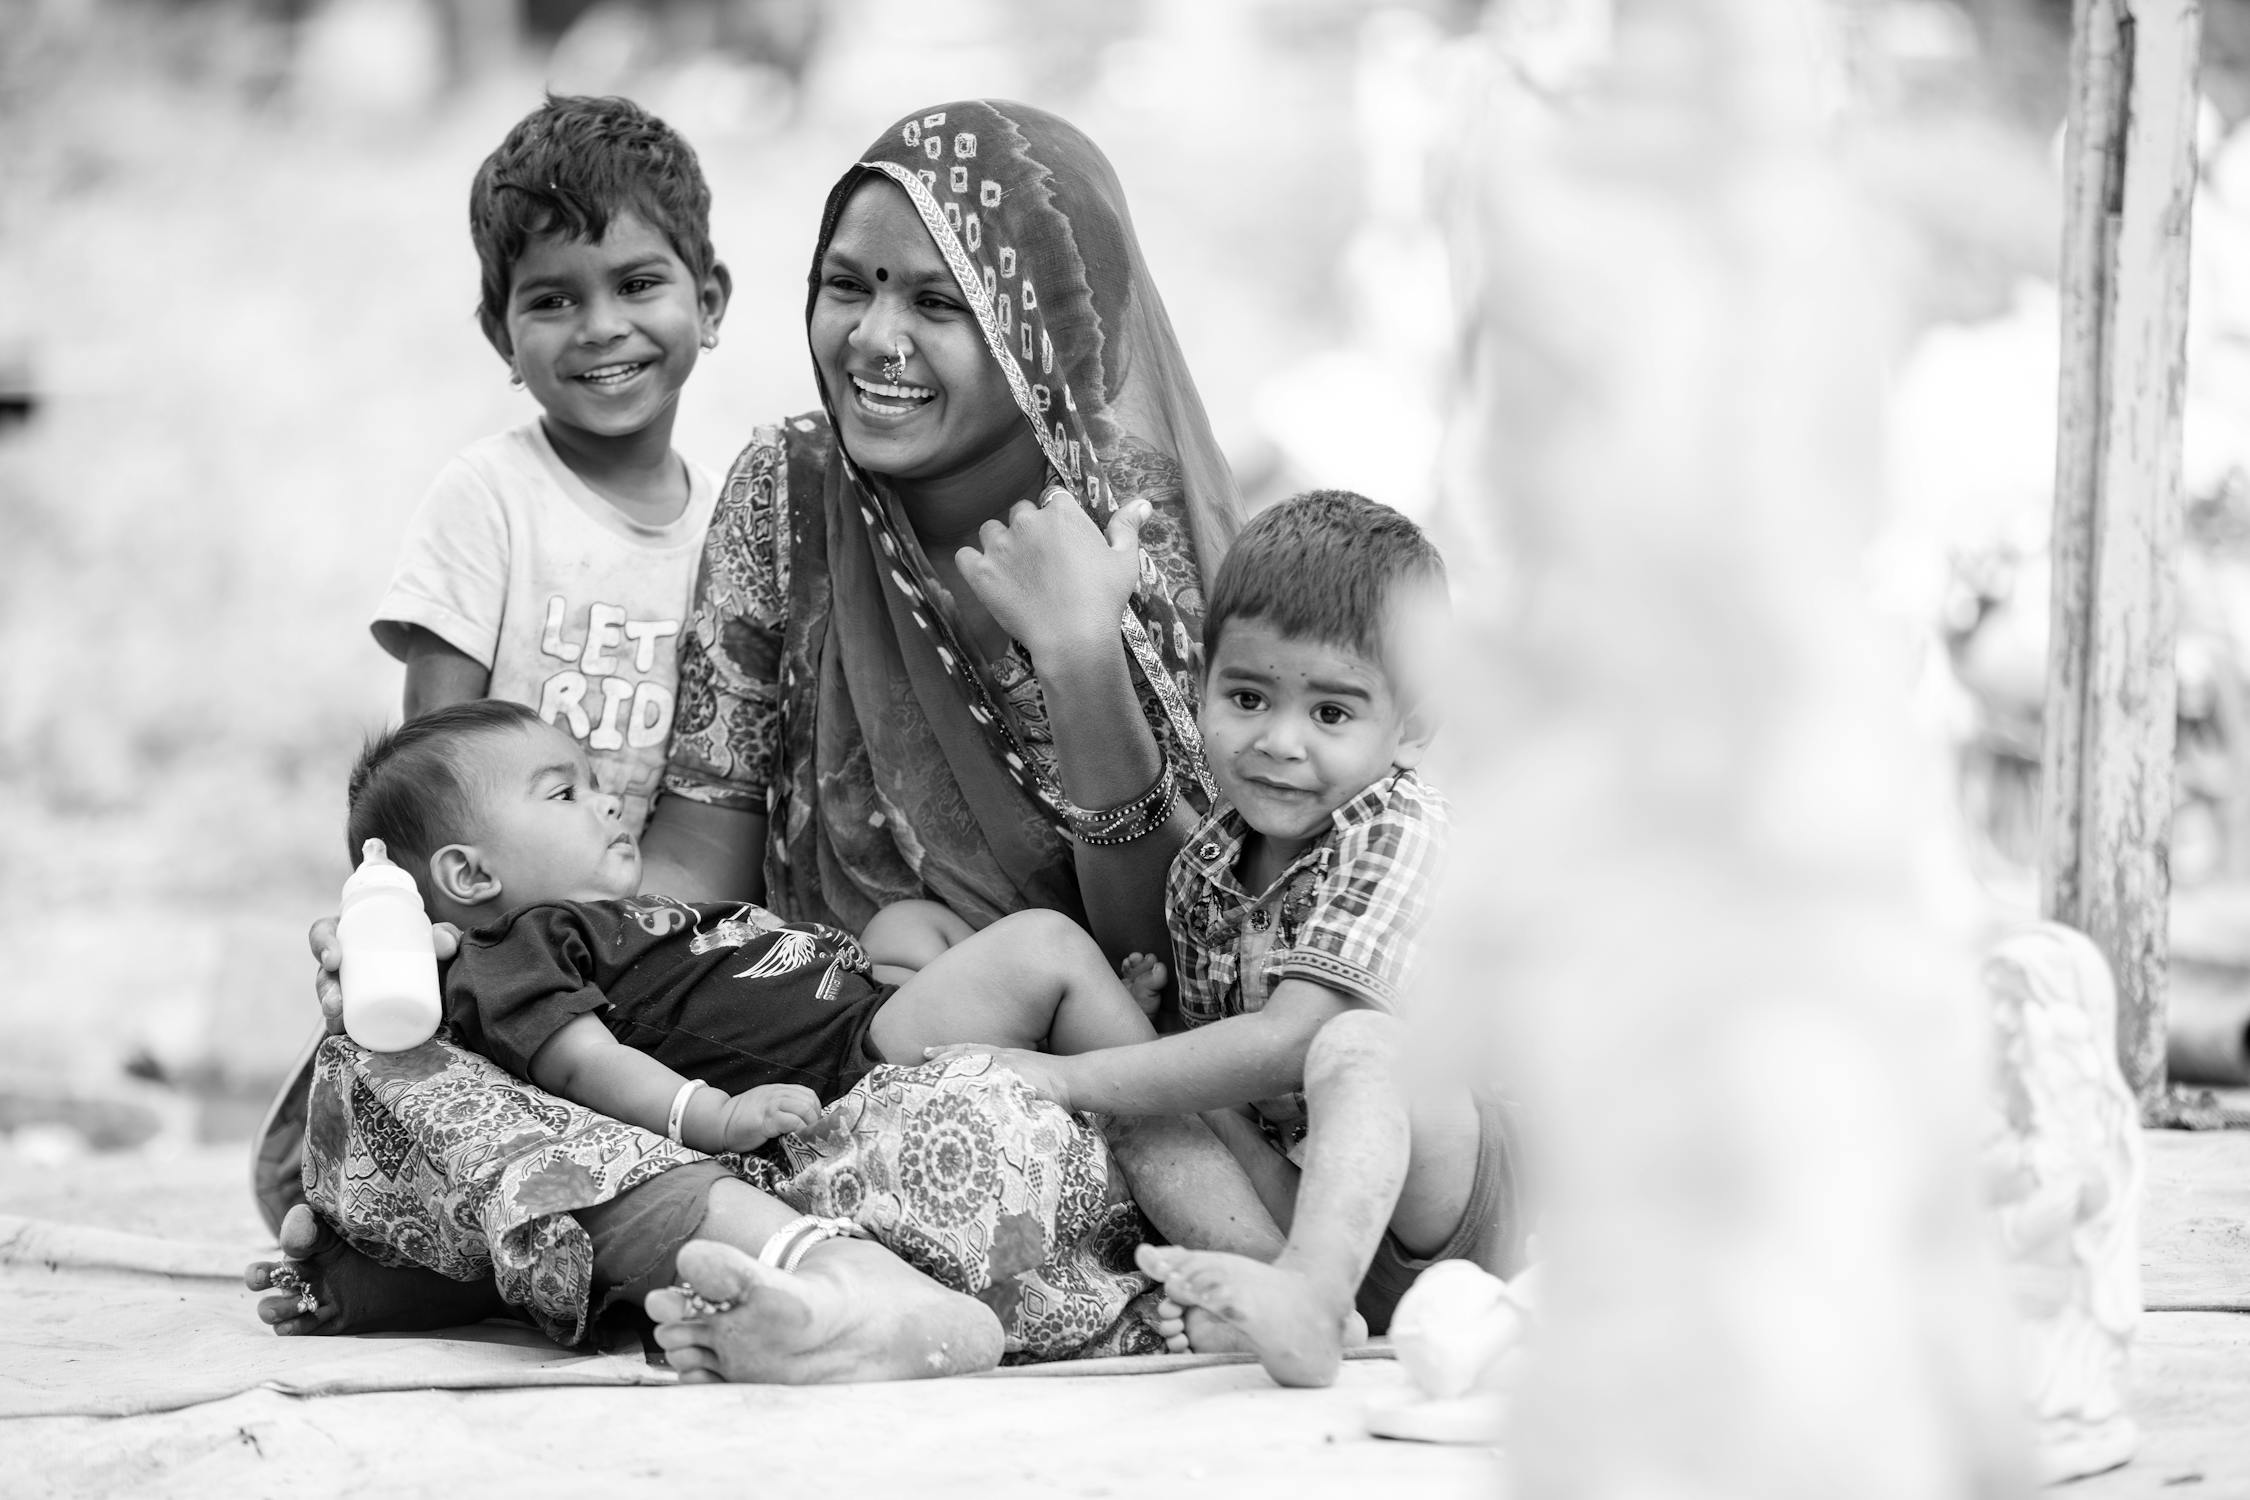 Indian Mom Photo by Anil Sharma from Pexels: https://www.pexels.com/photo/monochrome-photo-of-a-mother-and-her-children-smiling-together-10533763/